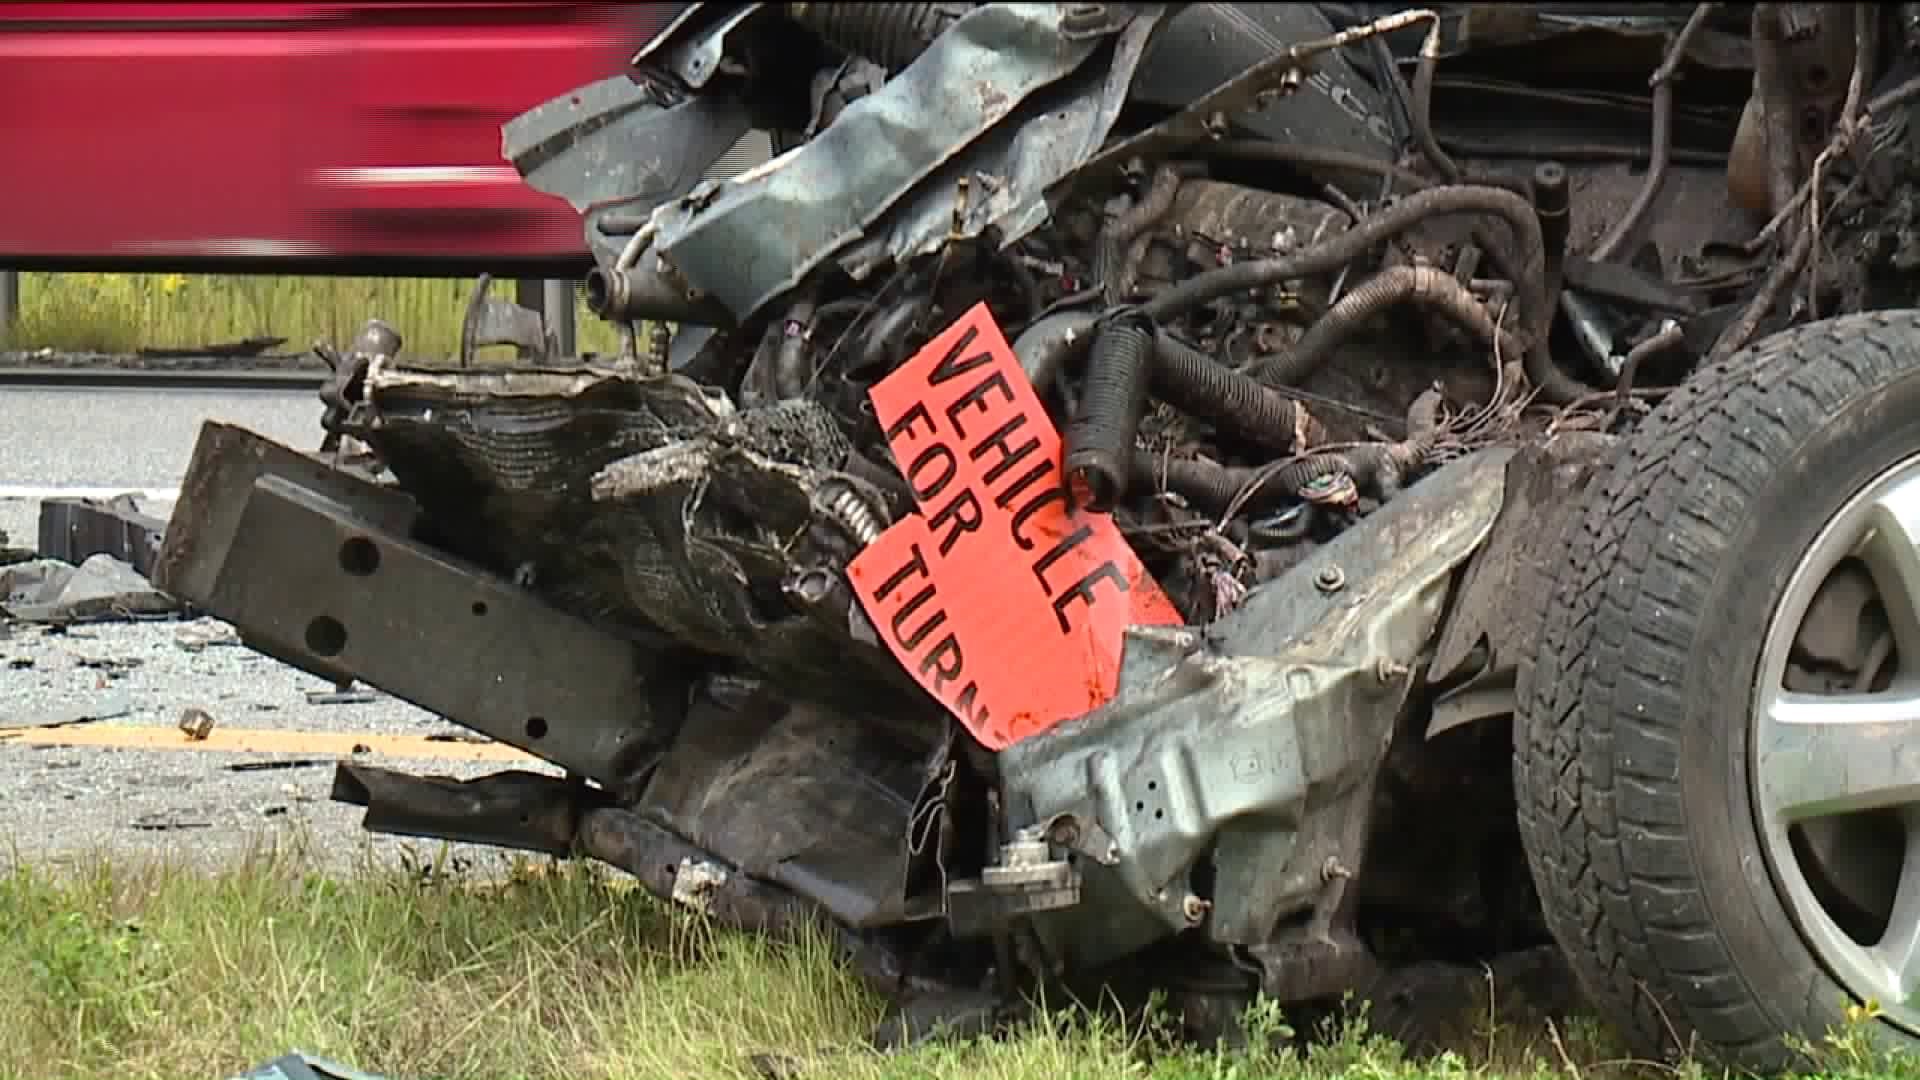 Crash in Construction Zone on Interstate 81